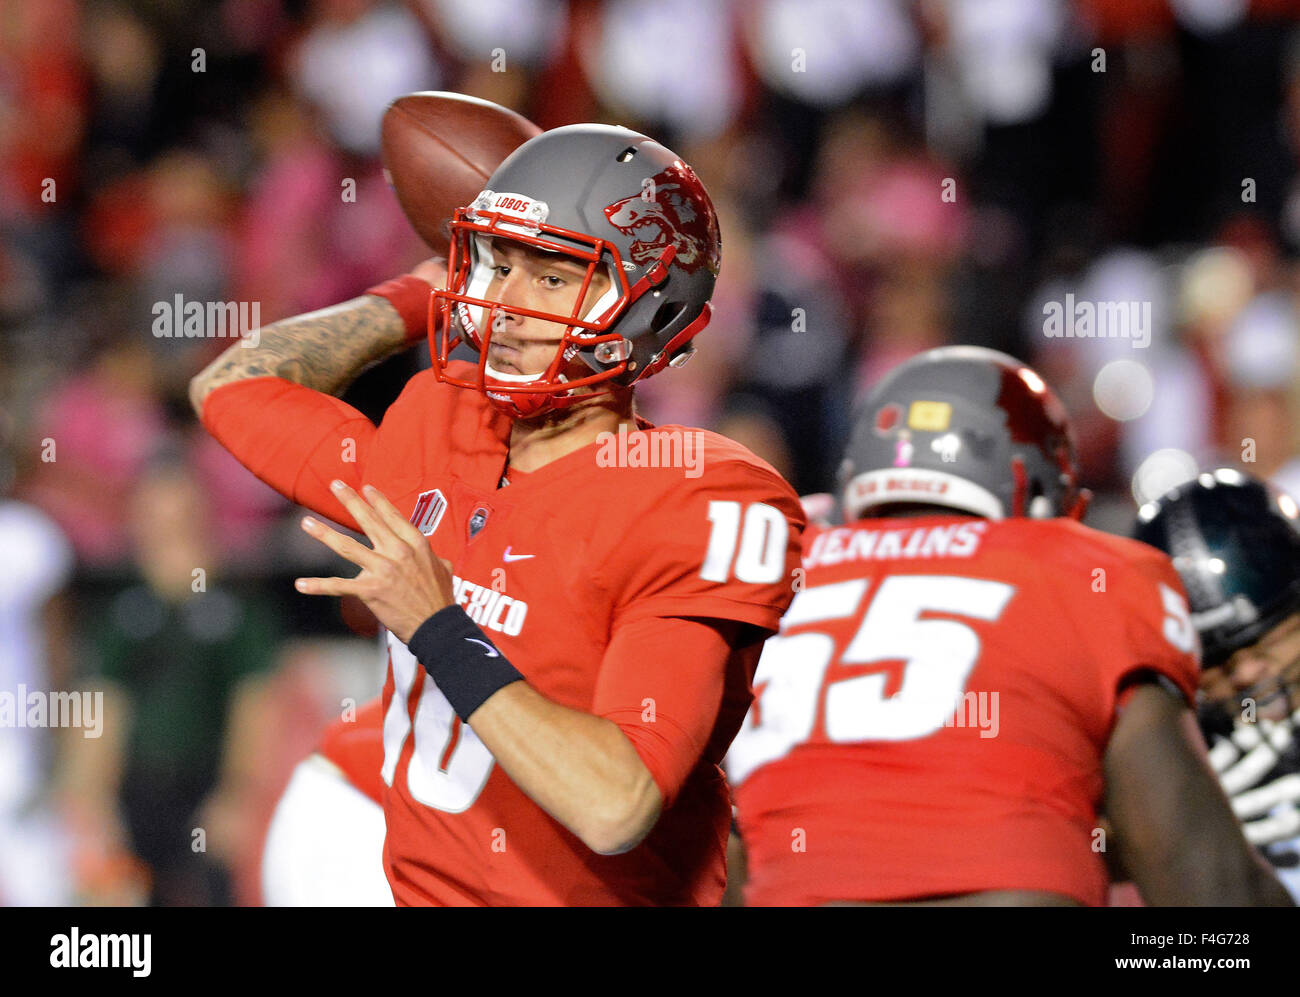 Albuquerque, NM, USA. 17th Oct, 2015. UNM's quarterback #10 Austin Apodoca passed his team to victory in the final minutes of the game Saturday night as UNM beat Hawaii 28-27. Saturday, Oct. 17, 2015. © Jim Thompson/Albuquerque Journal/ZUMA Wire/Alamy Live News Stock Photo